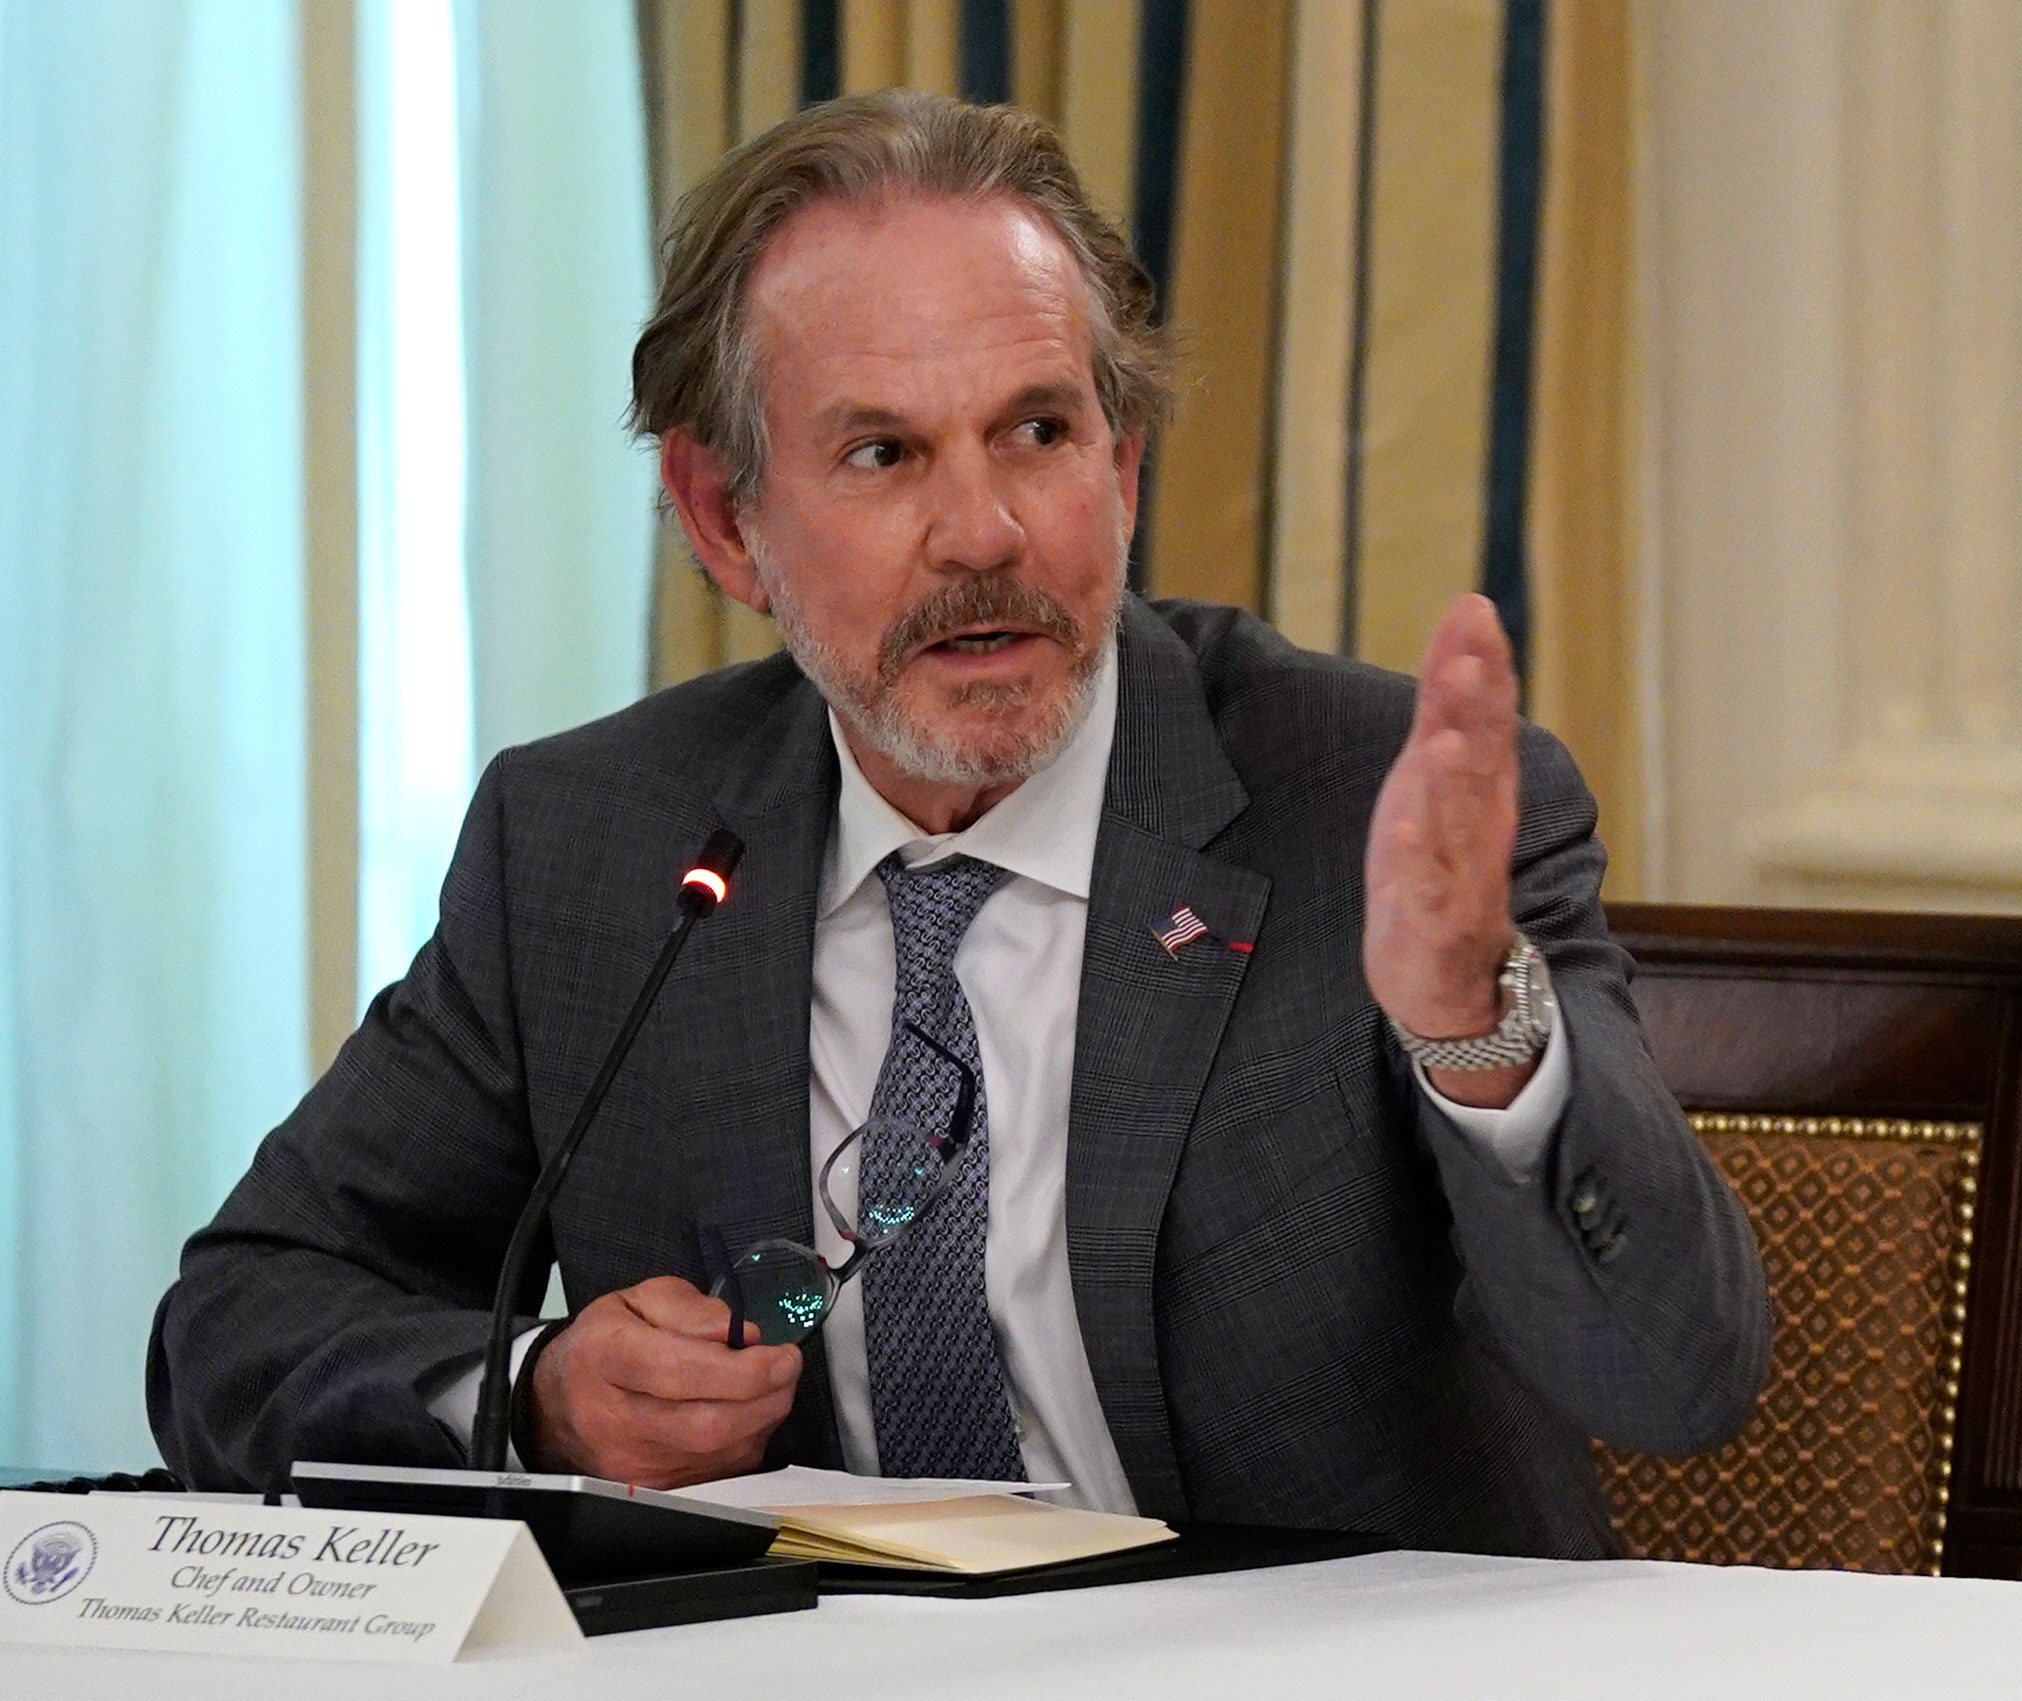 Thomas Keller, chef and owner of Thomas Keller Restaurant Group, speaks during a meeting with restaurant industry executives about the coronavirus response, in the State Dining Room of the White House on May 18 in Washington.